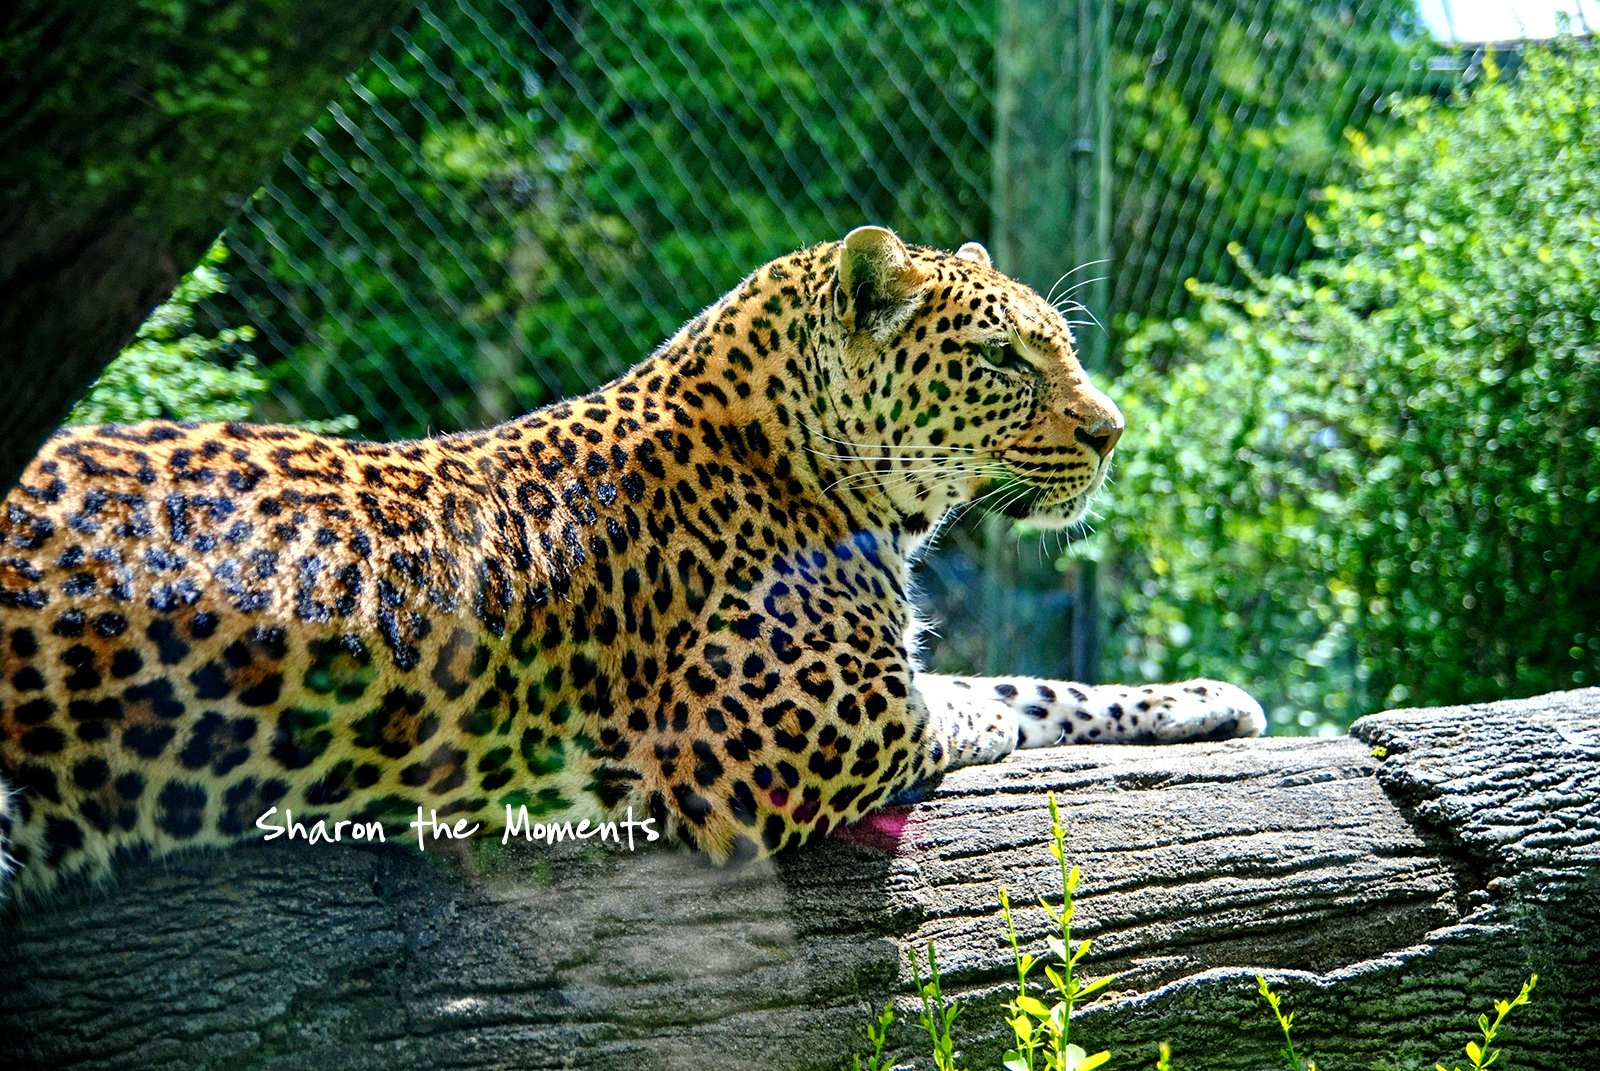 Monday Monday Spring Happy Mothers Day Columbus Zoo|Sharon the Moments blog